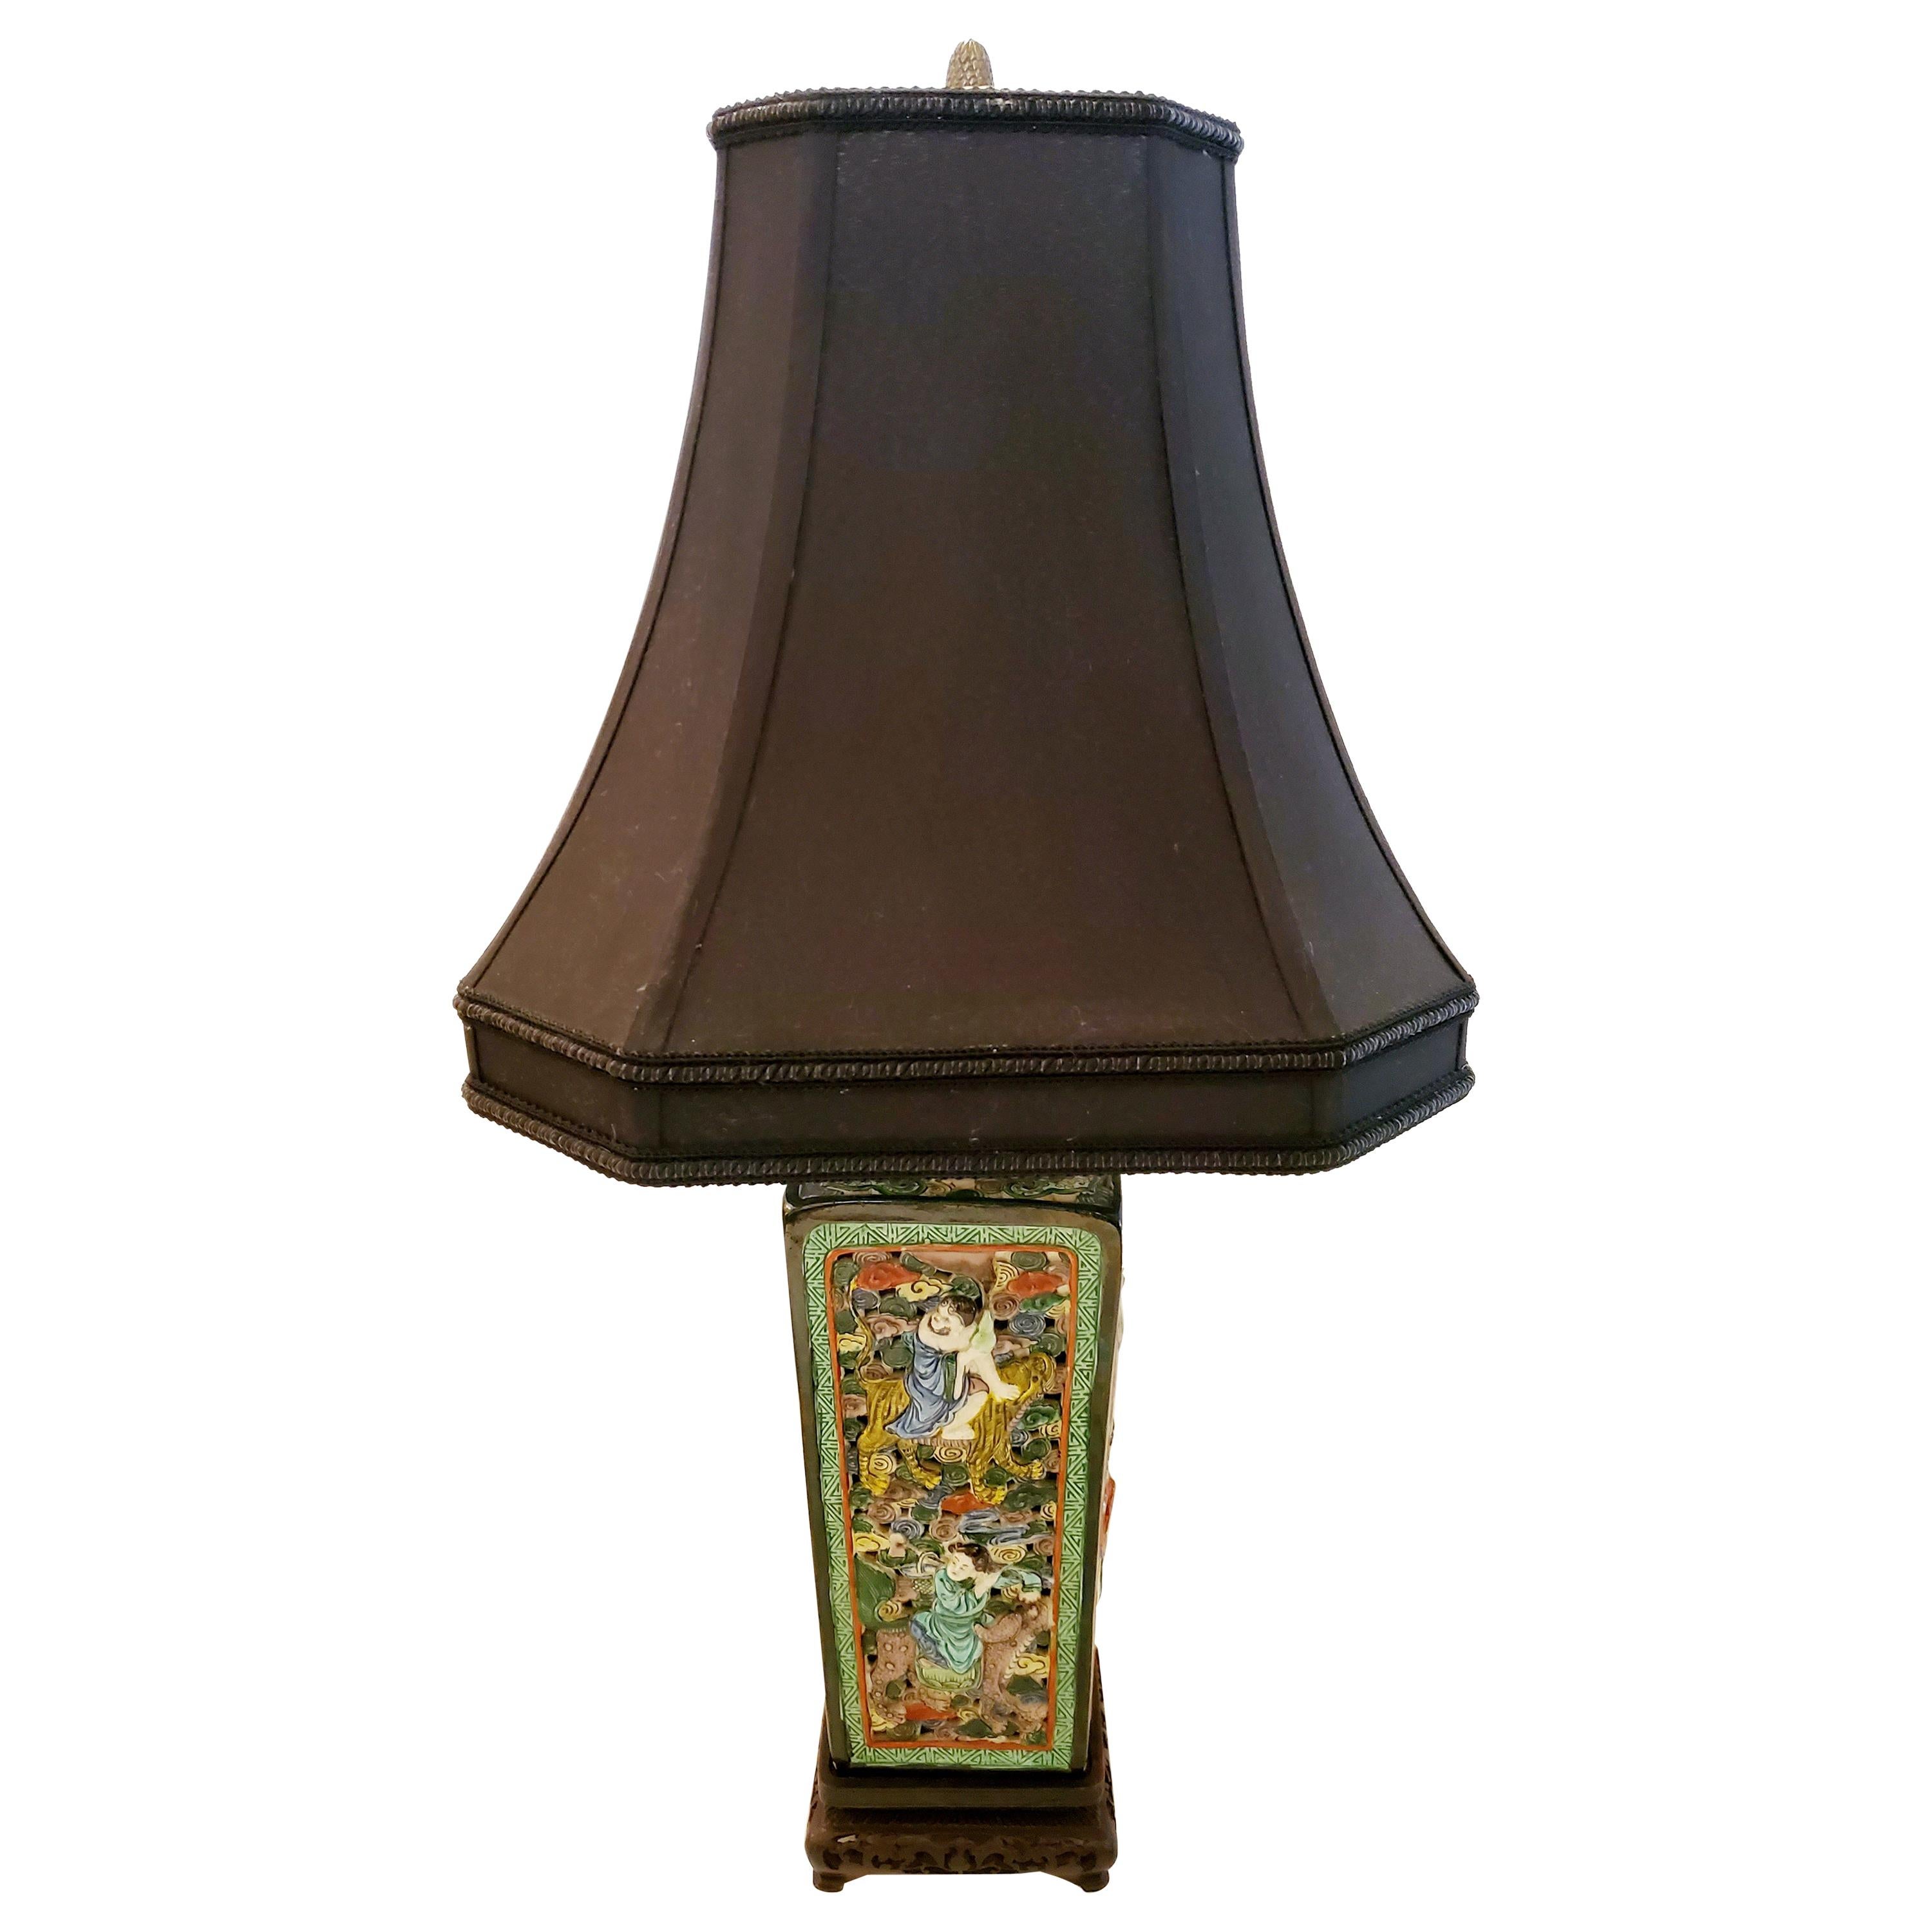 Beautiful Multi Colored Meticulously Detailed Figural Asian Table Lamp